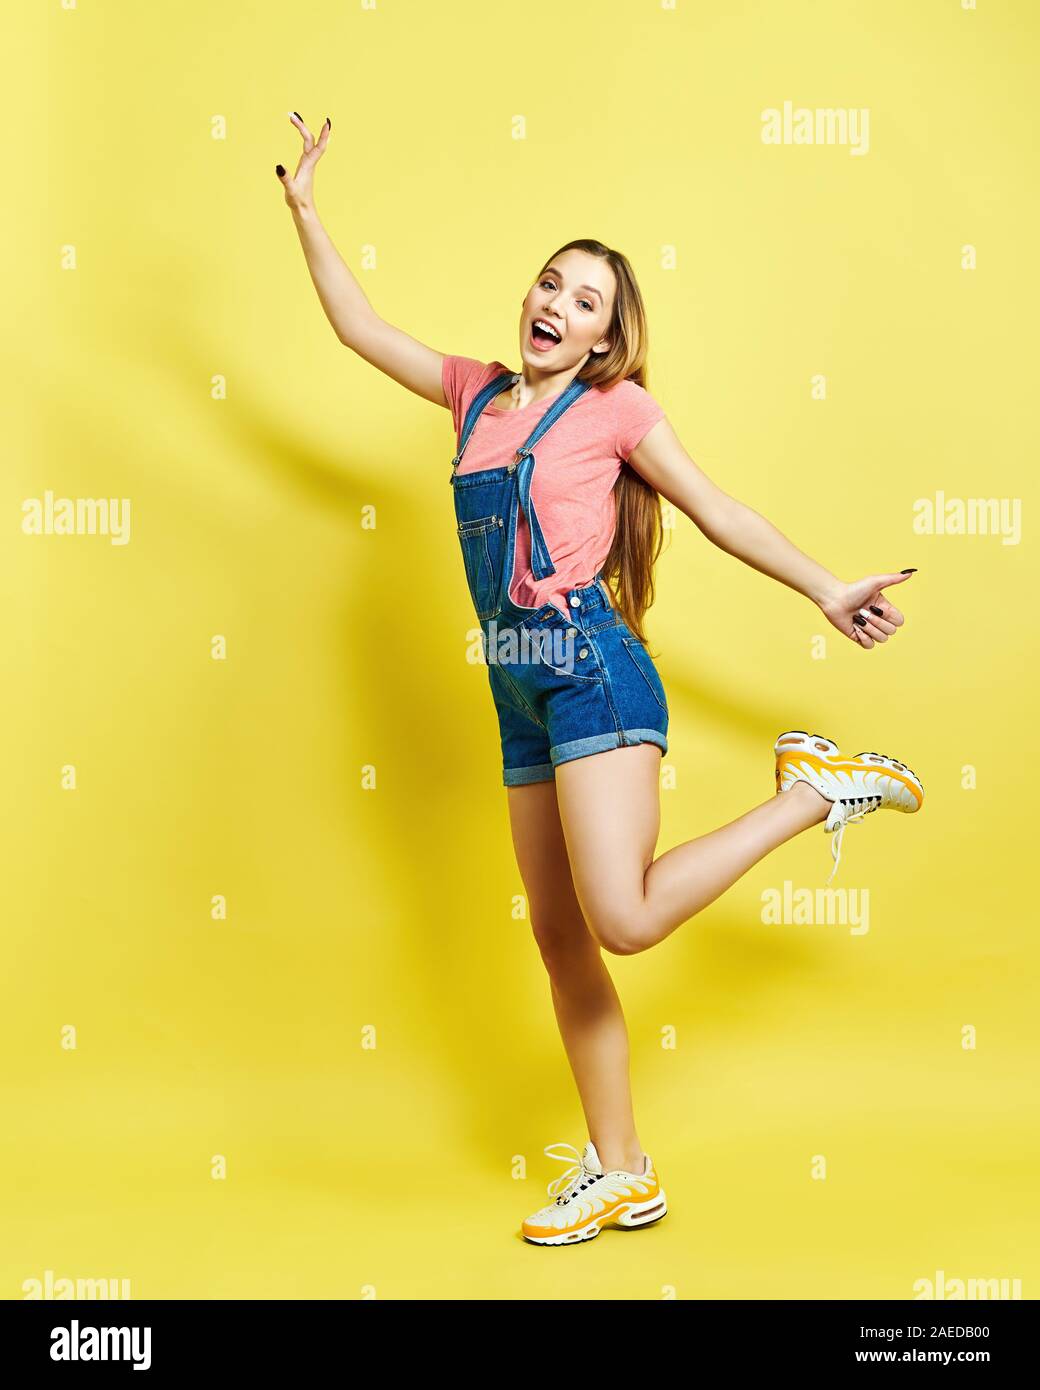 Girlish, funky, happiness, dream, fun, joy, summer concept. Very excited happy cute girl is jumping up, in summer outfit, on yellow background Stock Photo